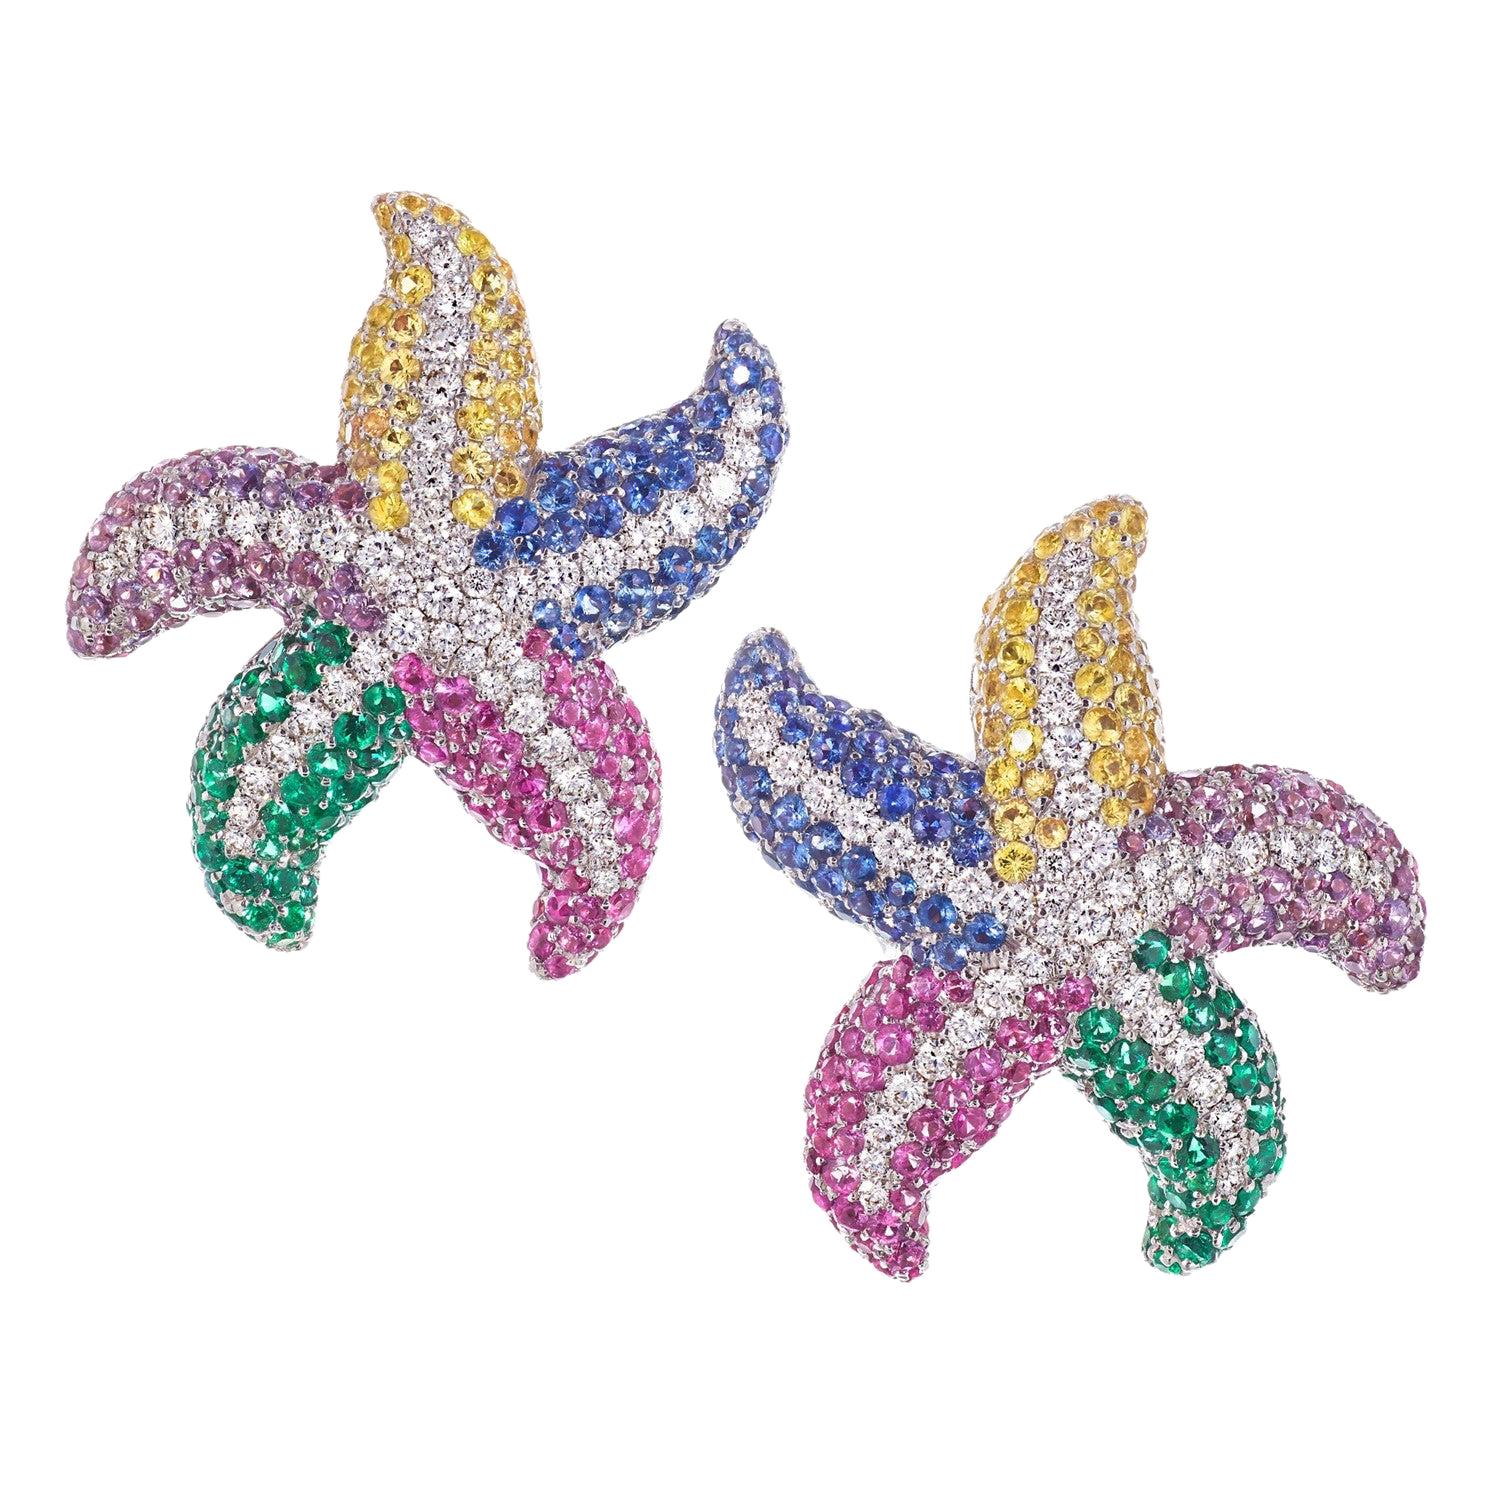 Contemporary Diamond, Sapphire and Emerald White Gold "Starfish" Earrings